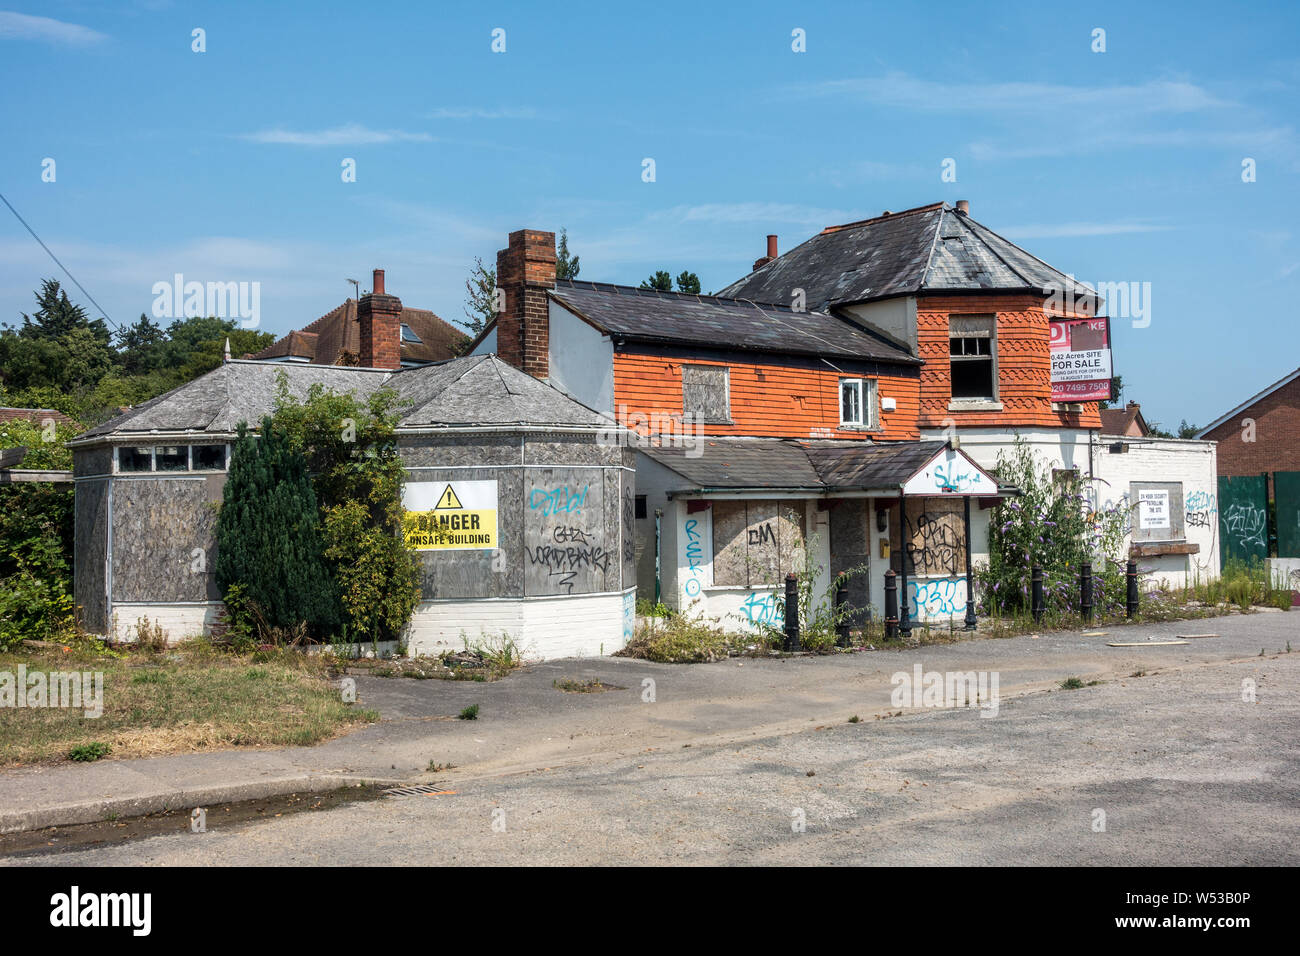 An old closed down pub on the bath road in Reading, UK. It is left vacant and derelict and is a target for vandalism and graffiti. Stock Photo